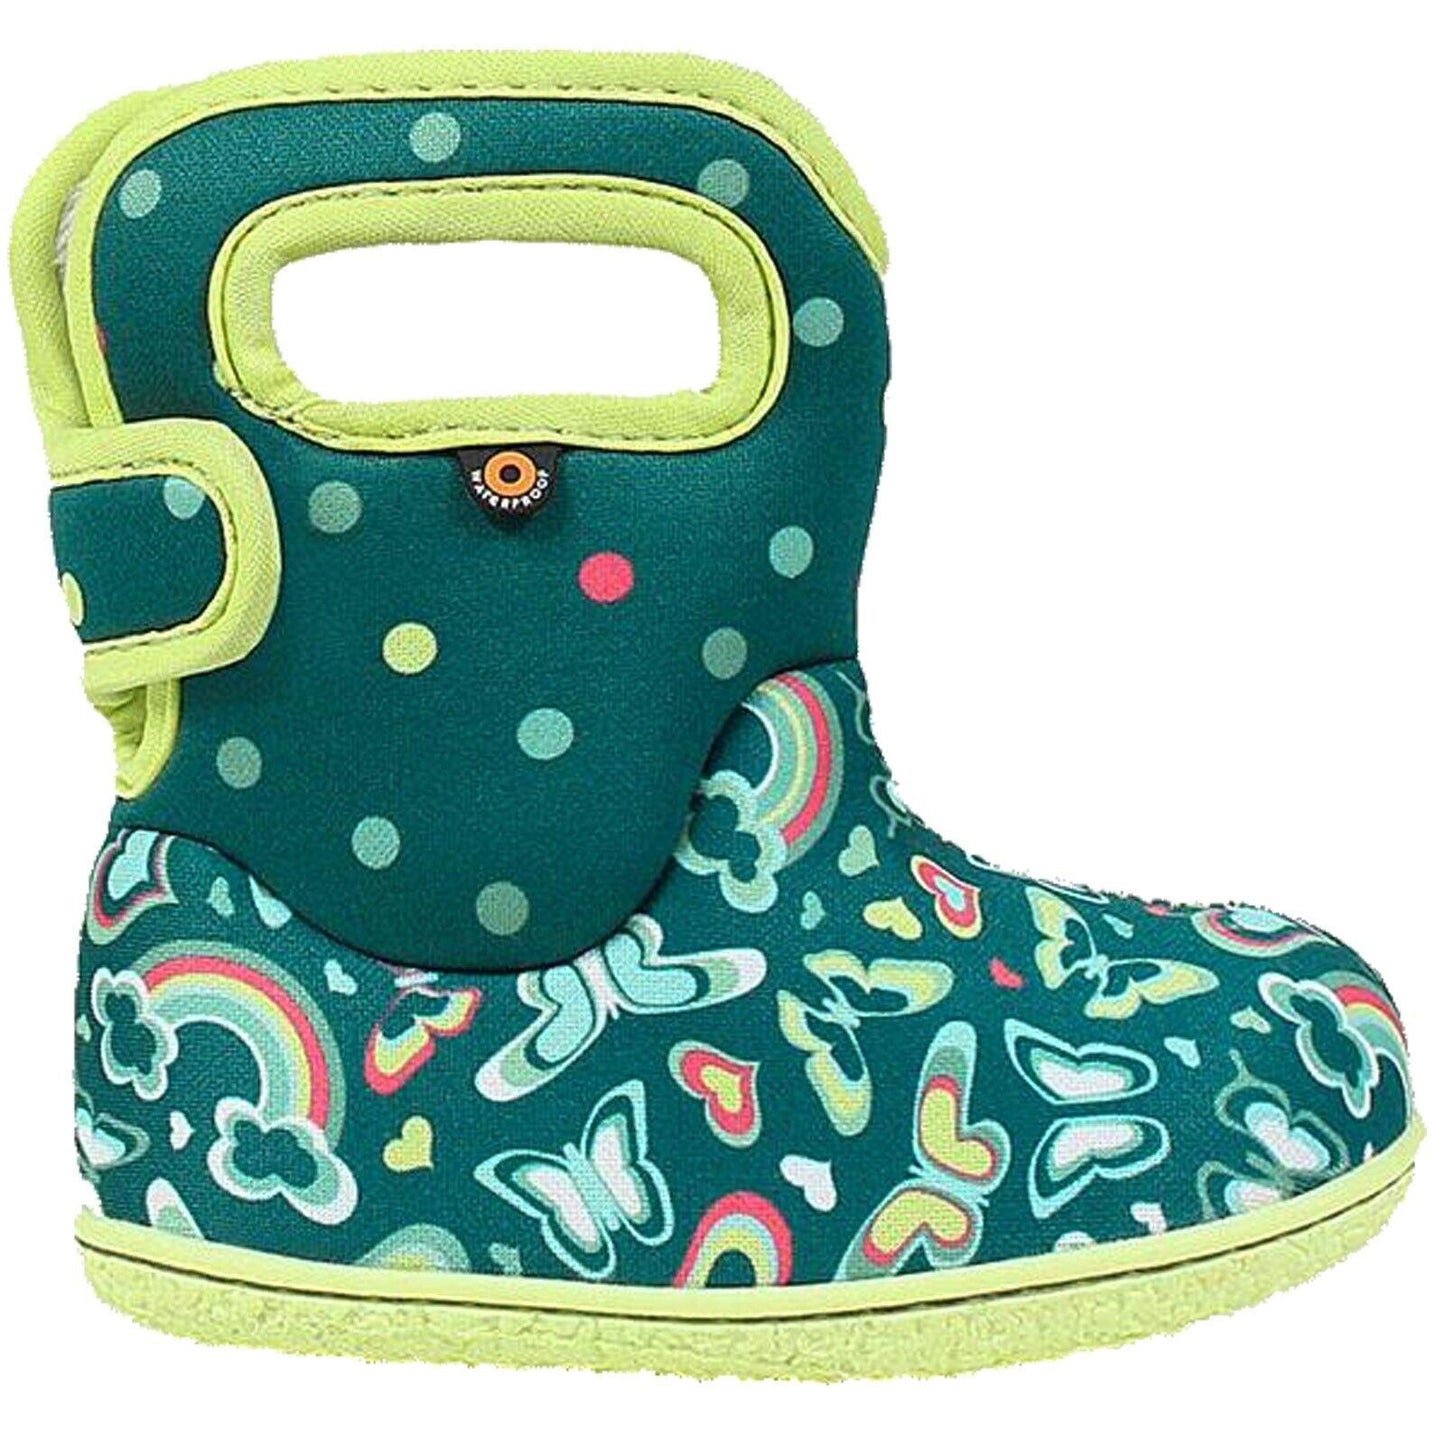 Girls Baby Bogs Rainbow Green Washable Insulated Warm Wellies Boots 724651